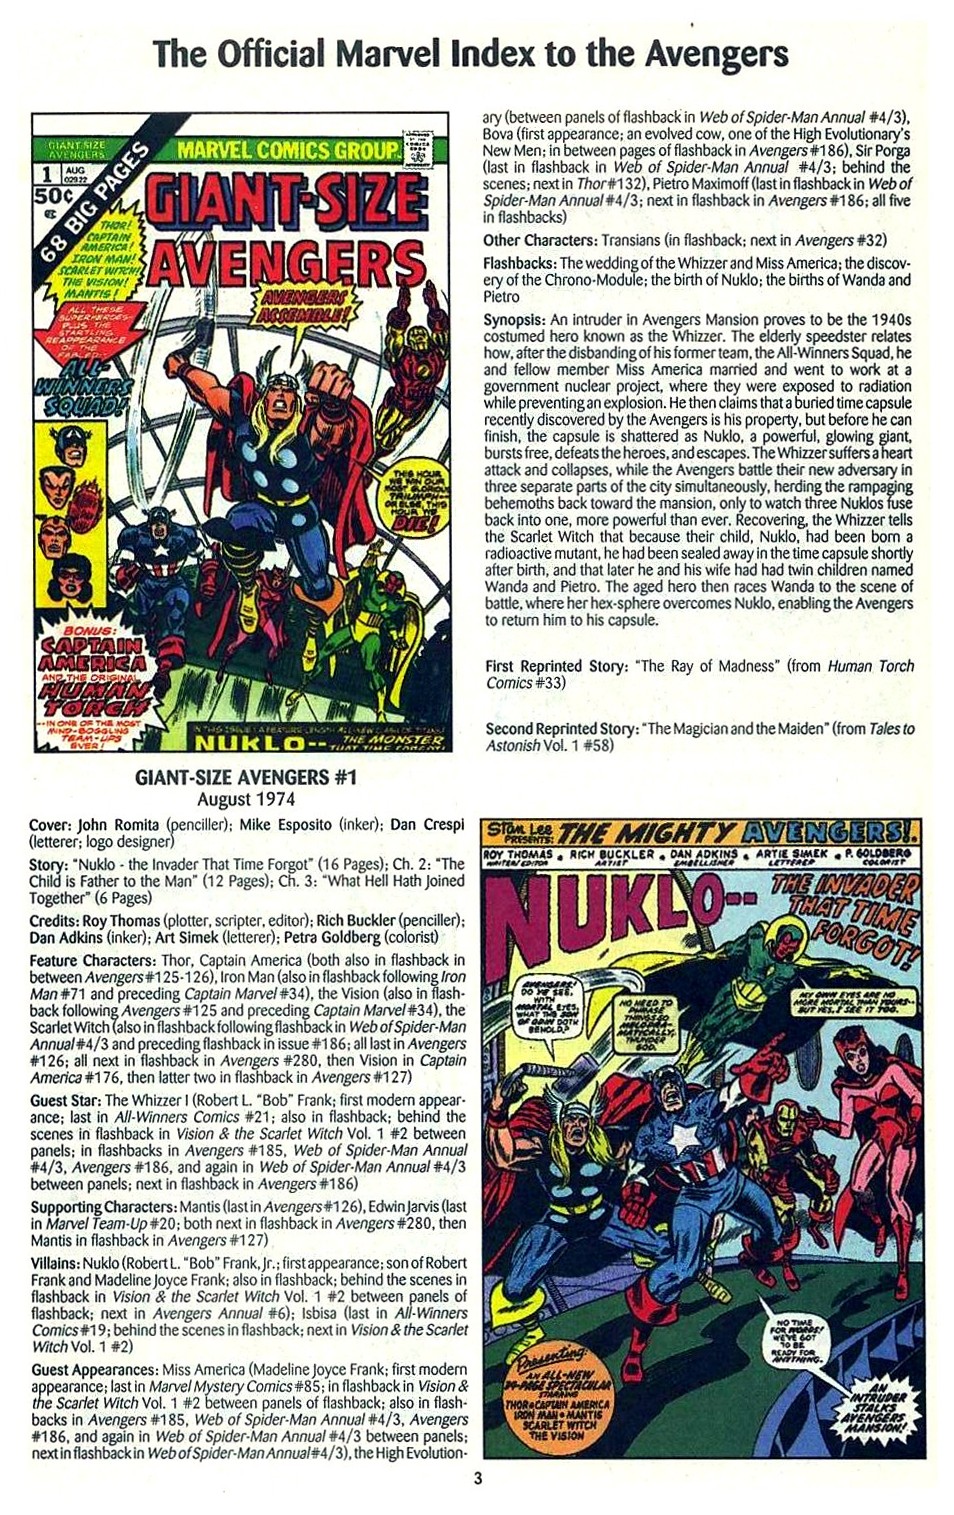 Read online The Official Marvel Index to the Avengers comic -  Issue #3 - 5